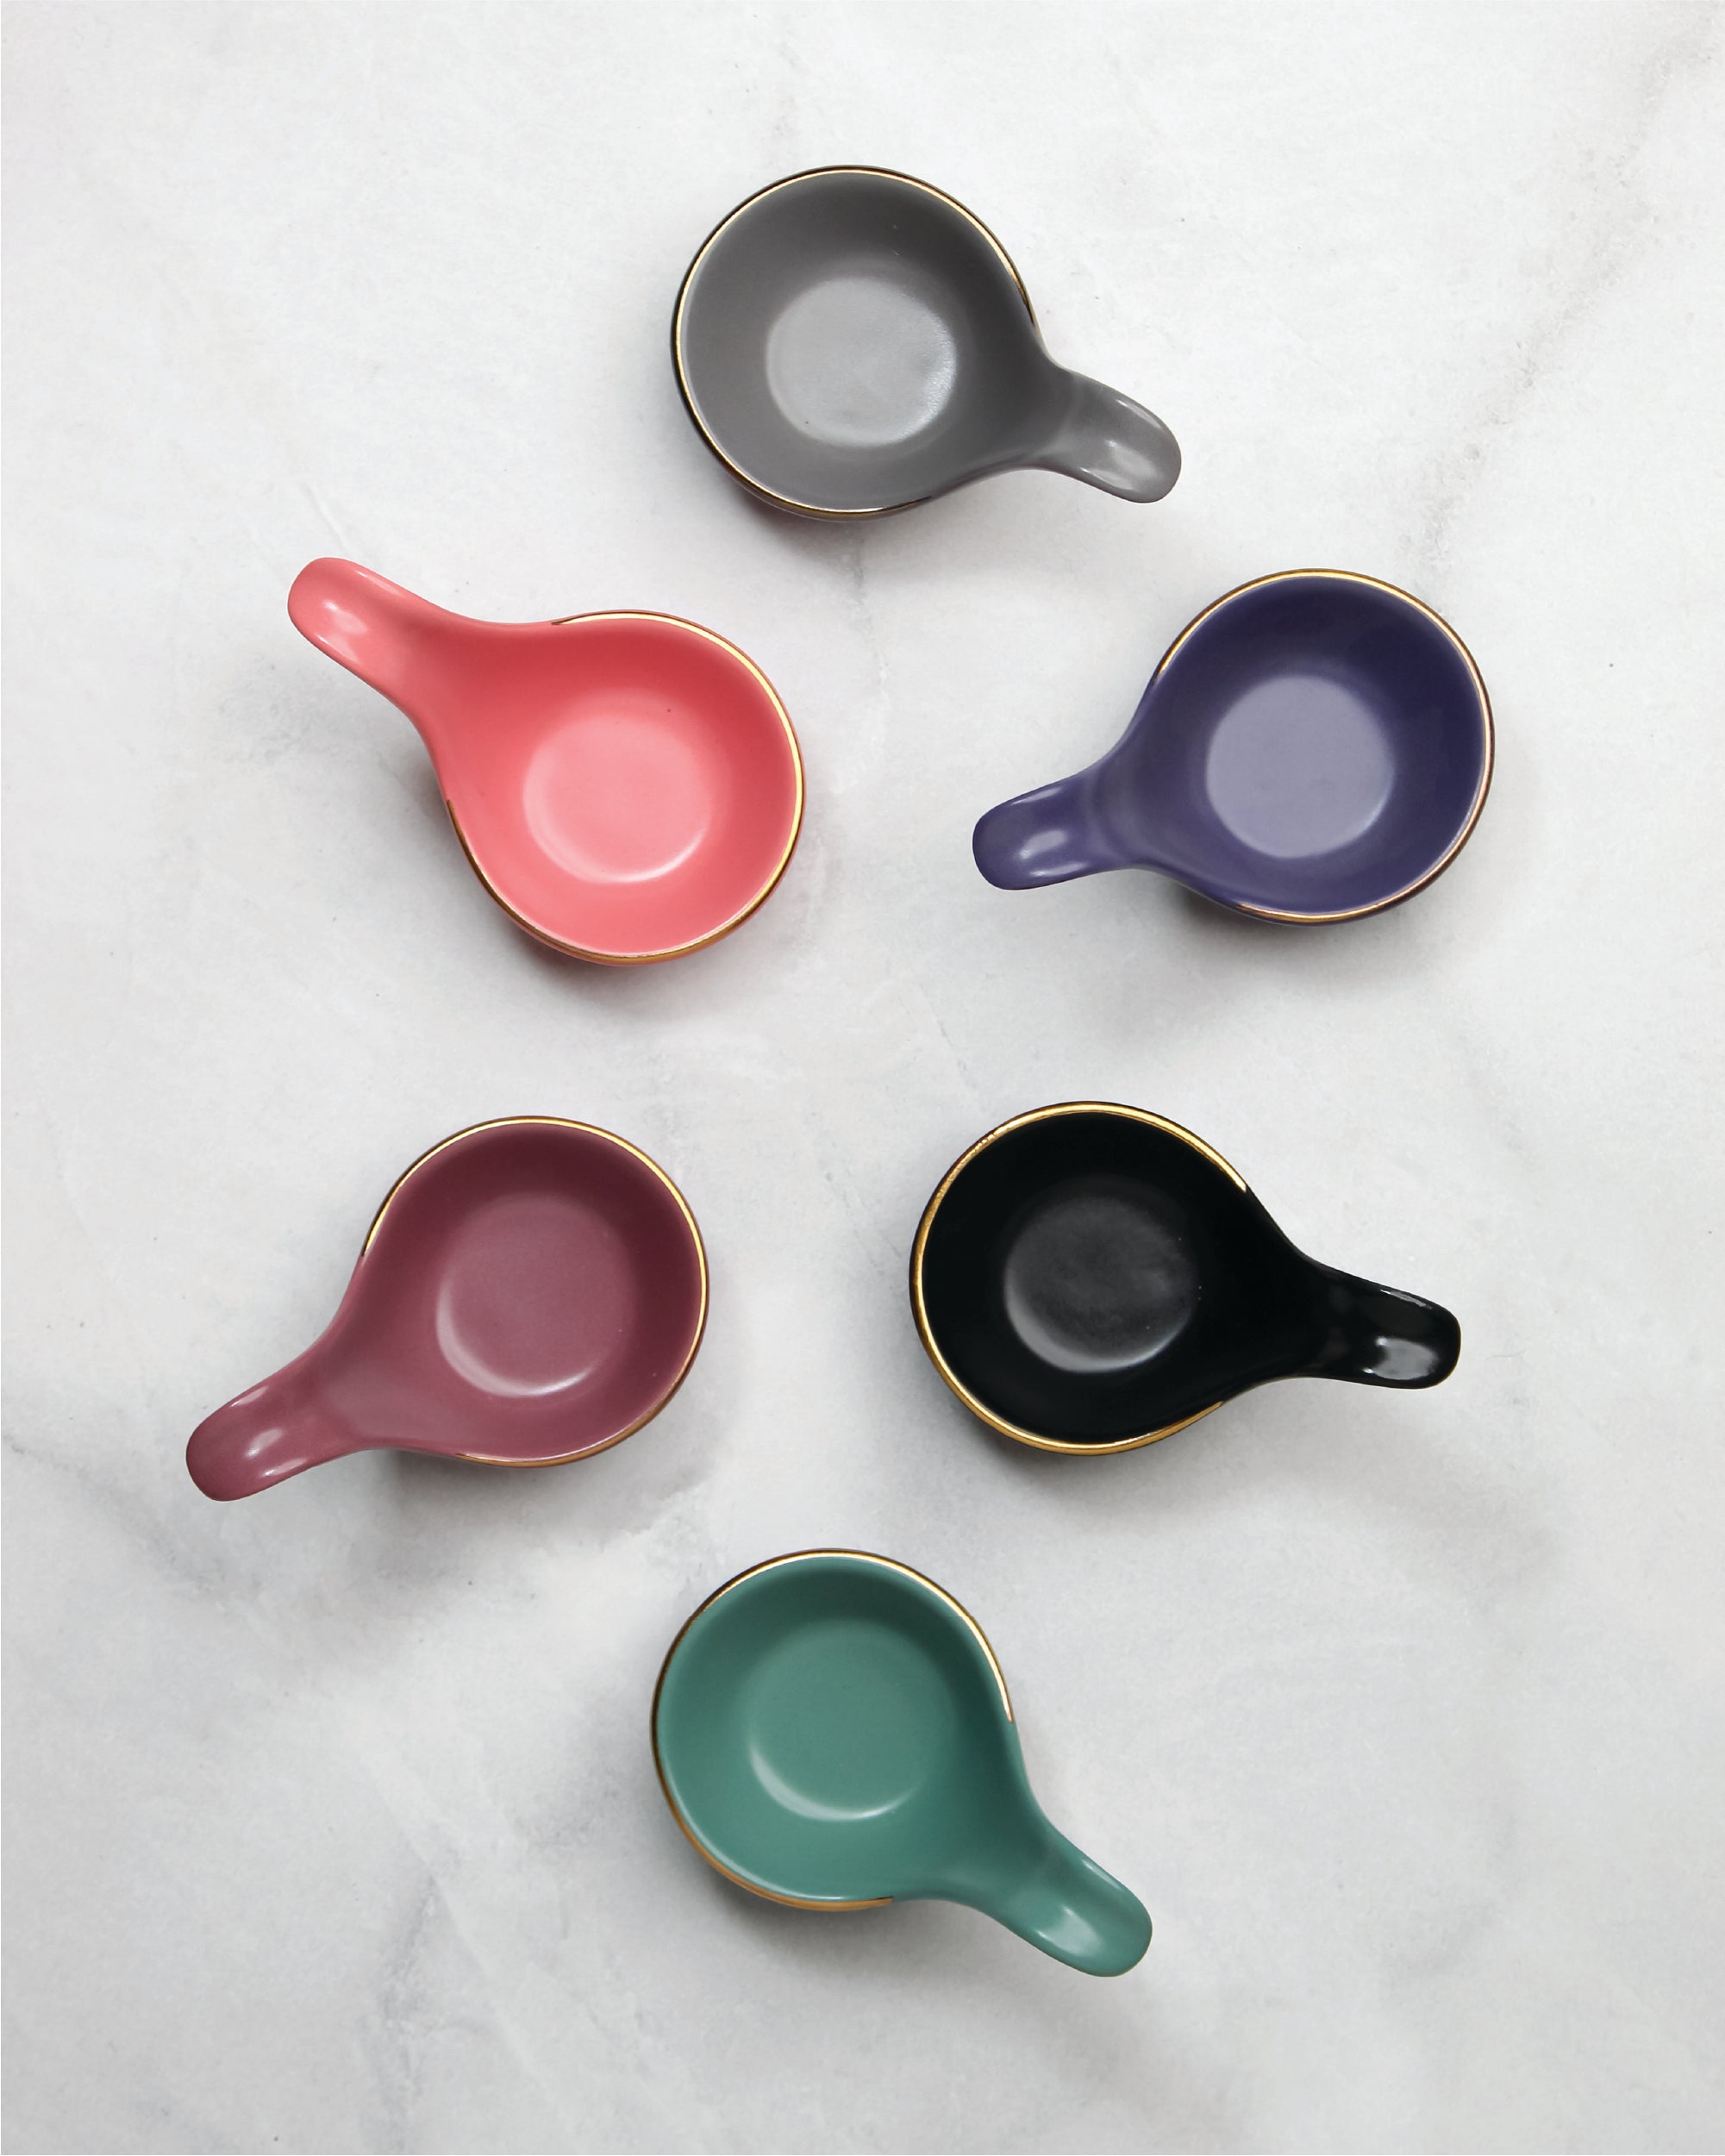 Bloom Vegas Canape Spoon - Crafted for Culinary Perfection - Vola Global